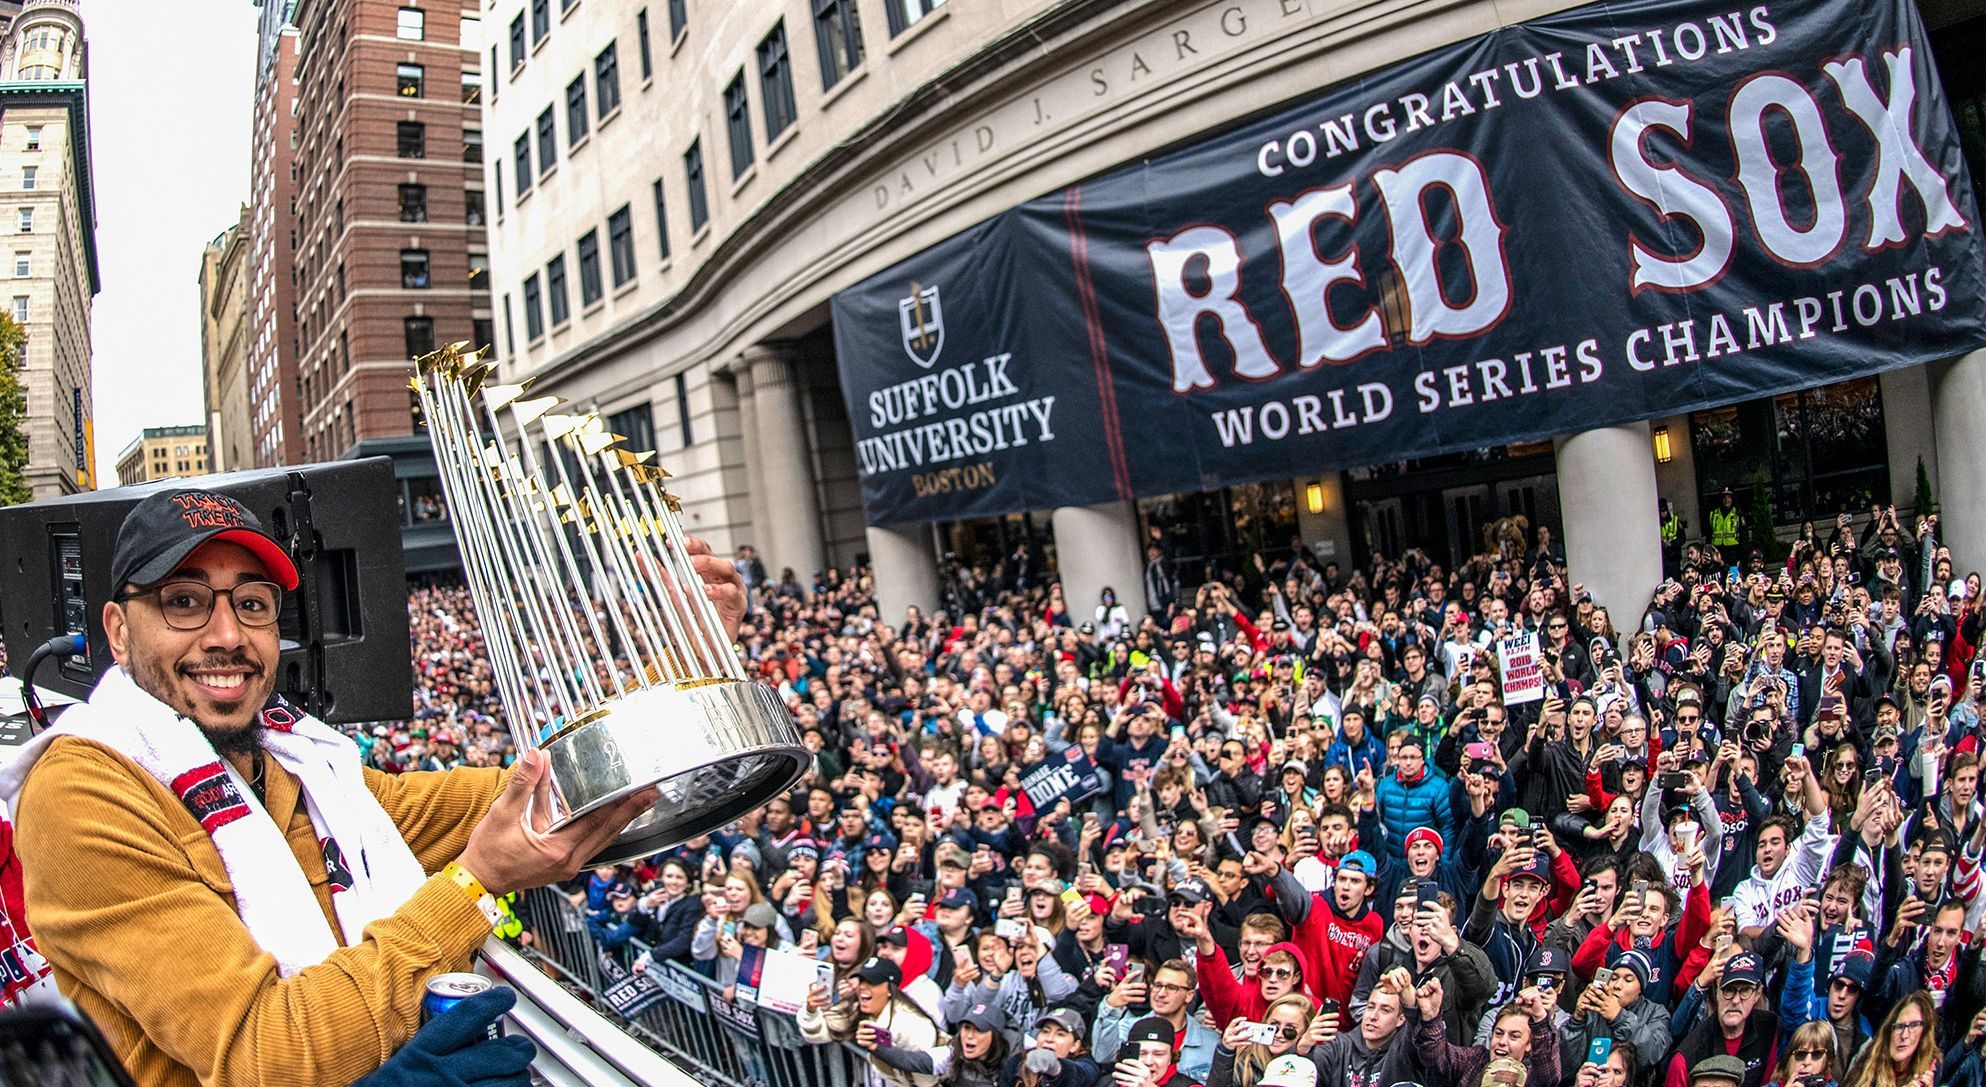 Fan arrested for throwing beer can at Red Sox parade